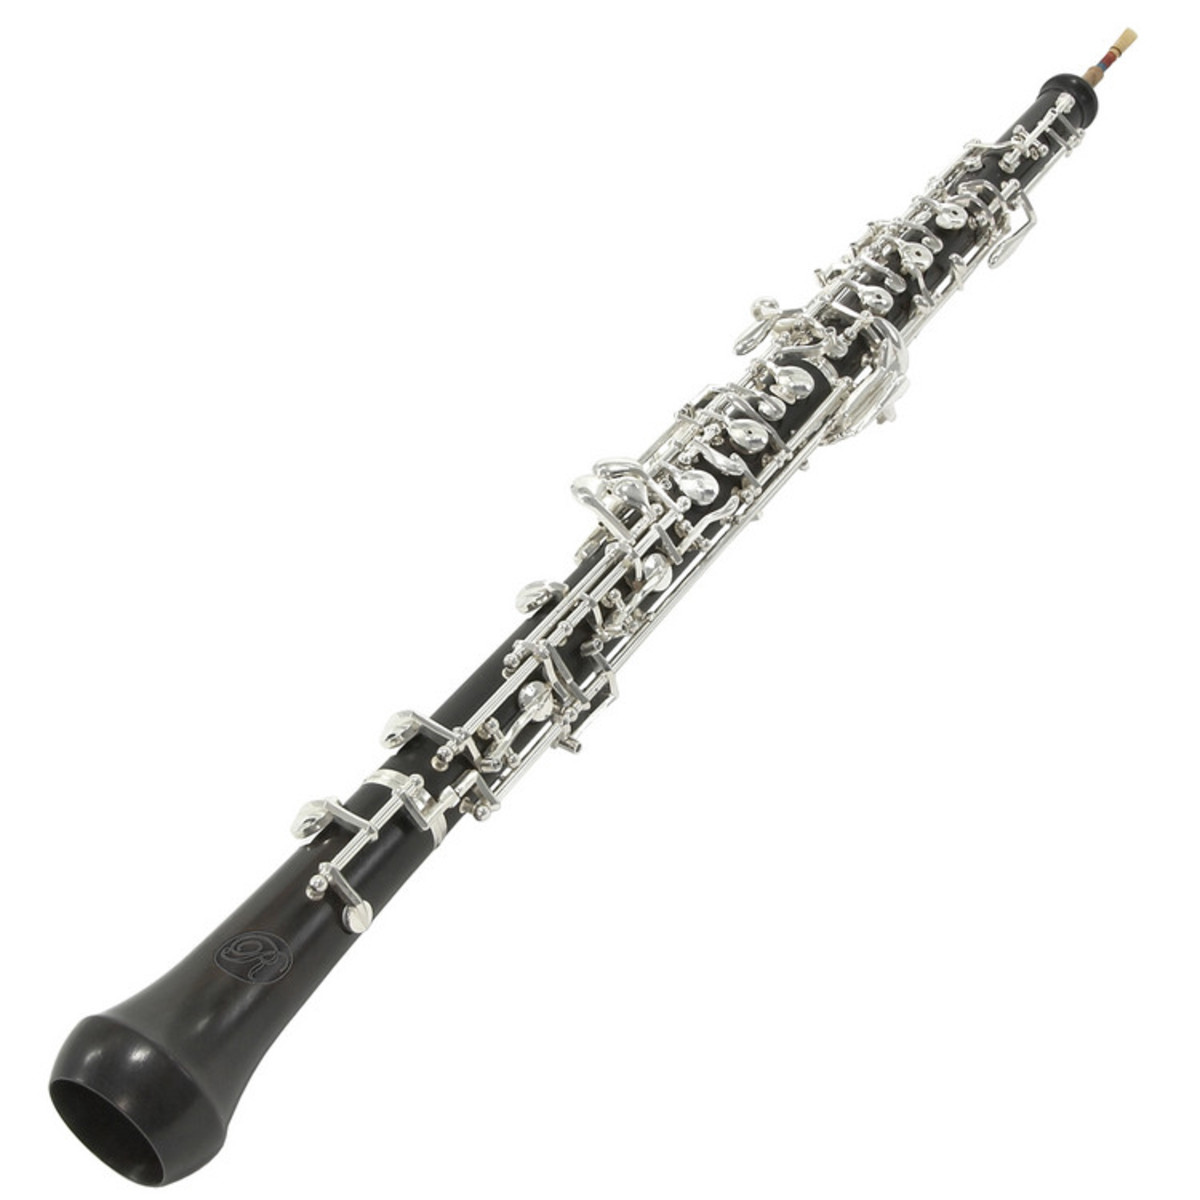 Clarinet and Oboe